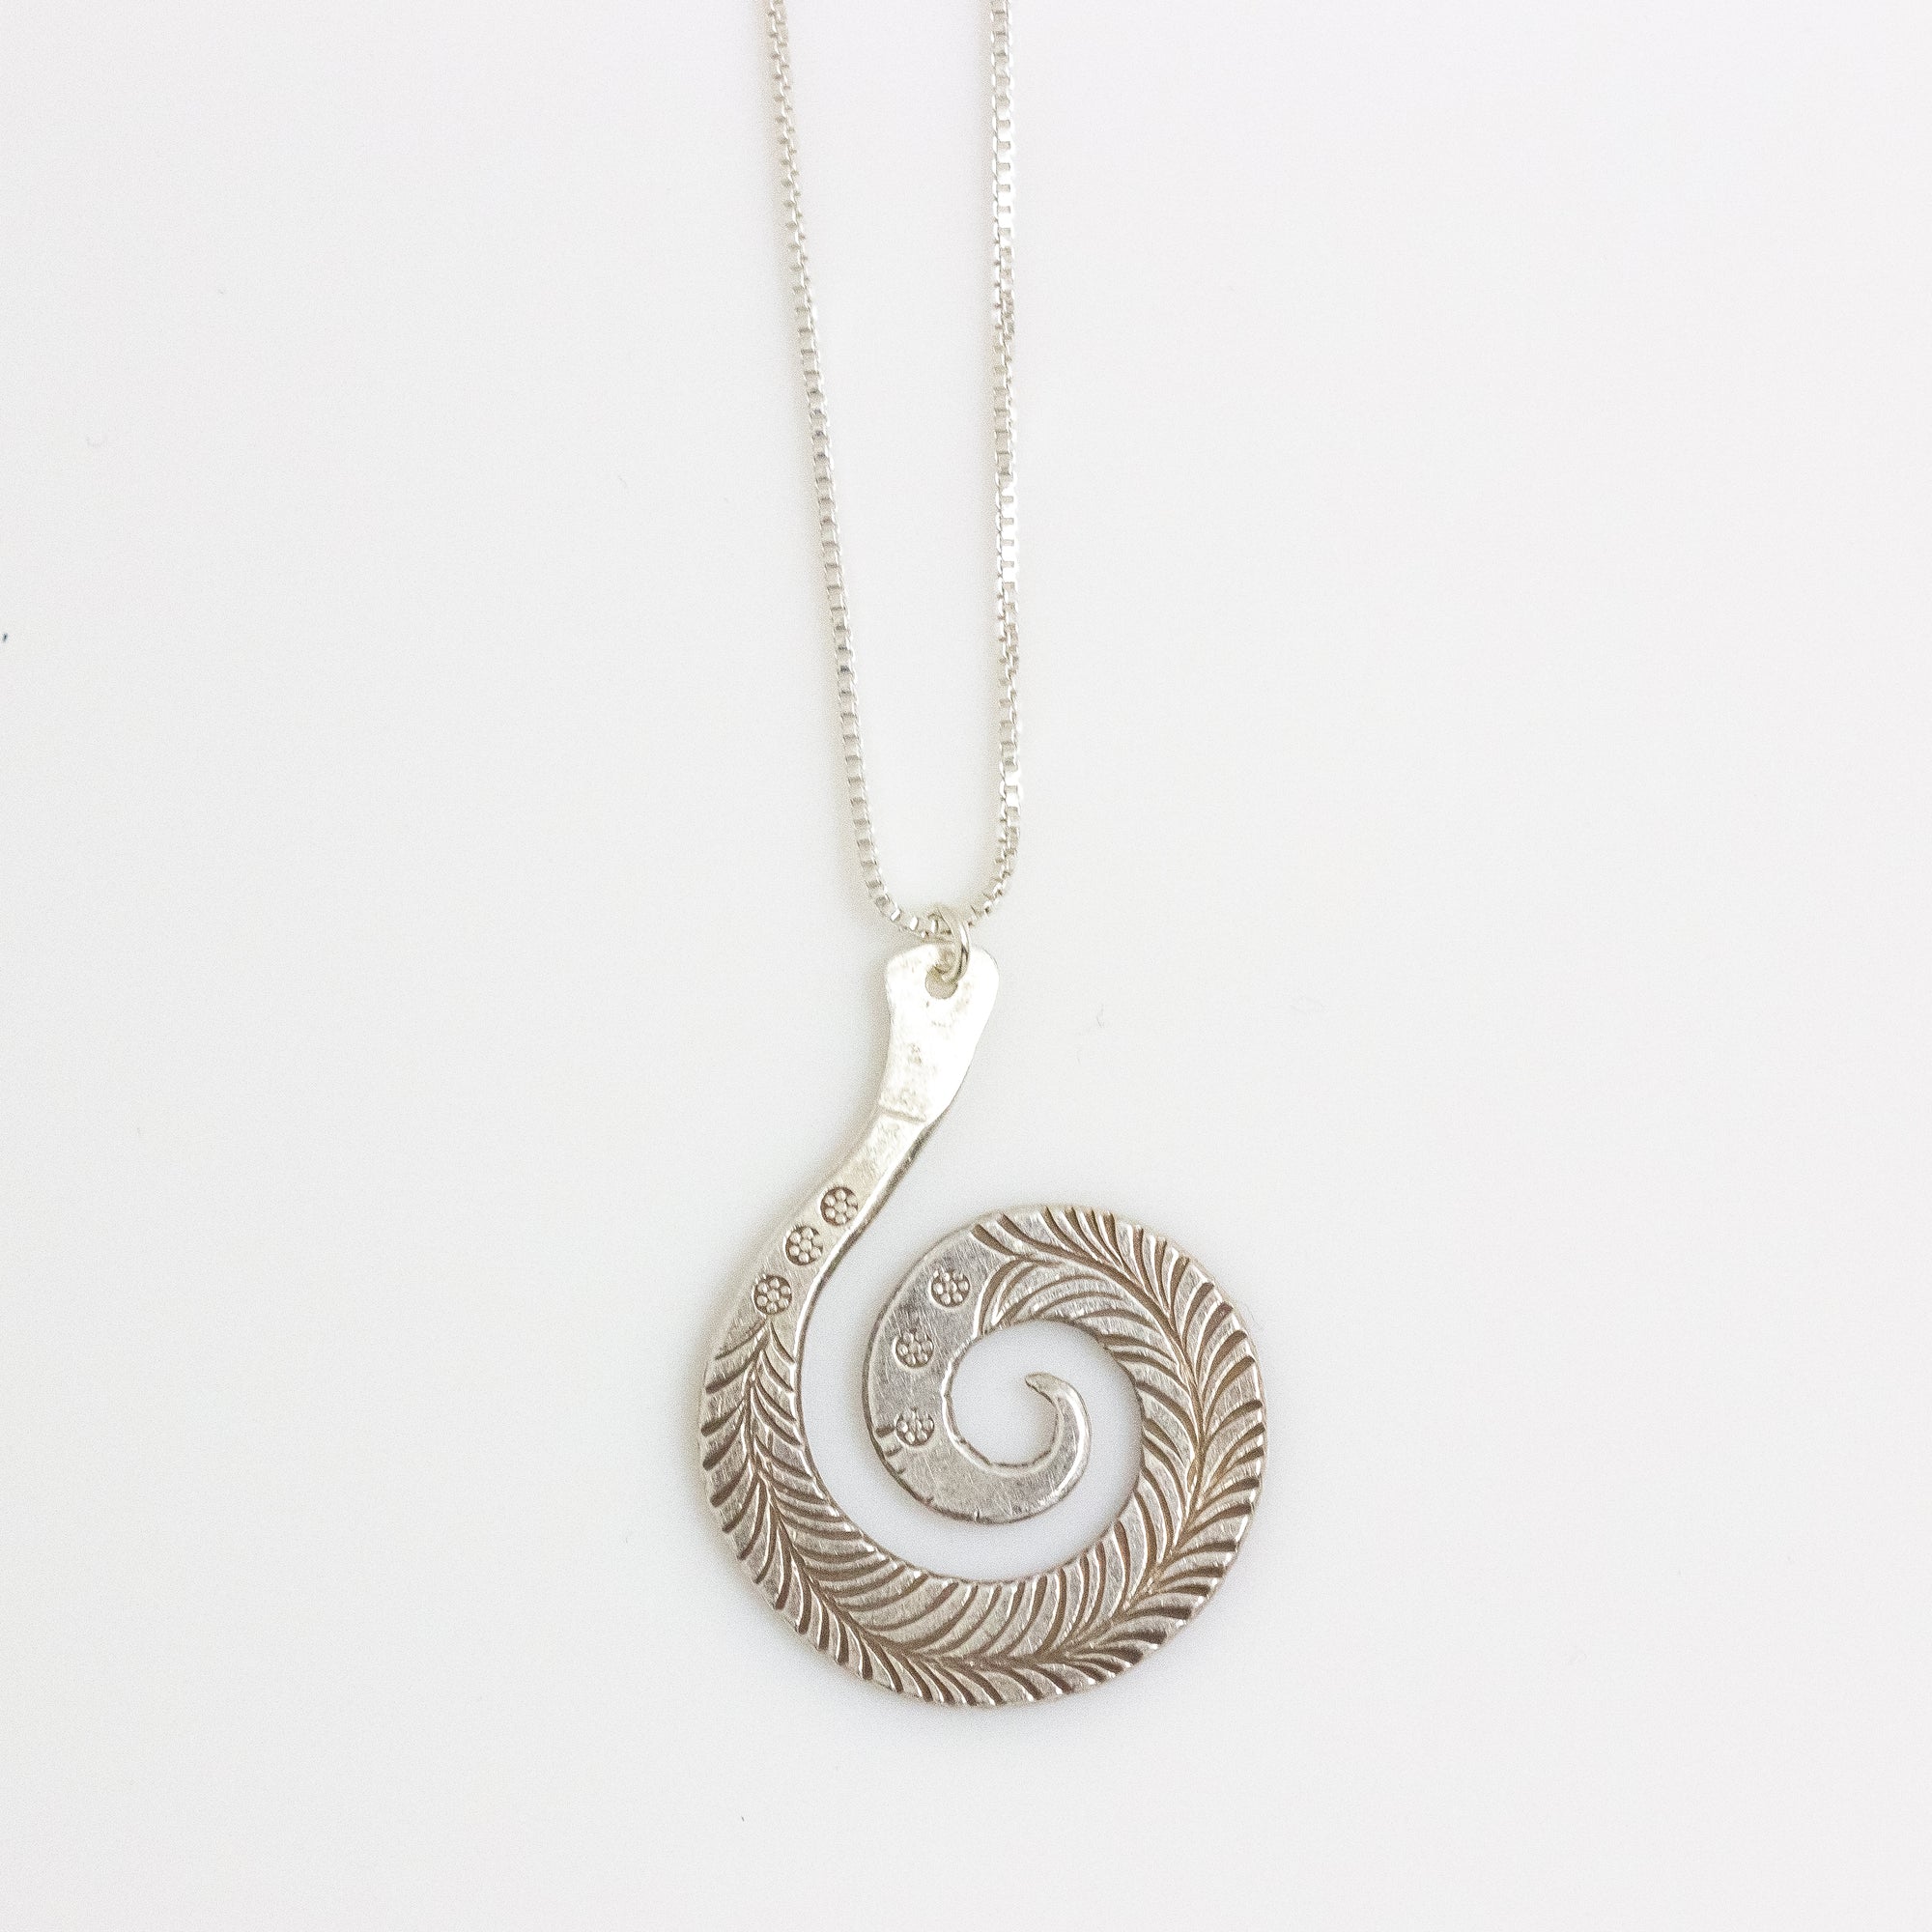 Handmade Feathered Spiral Necklace